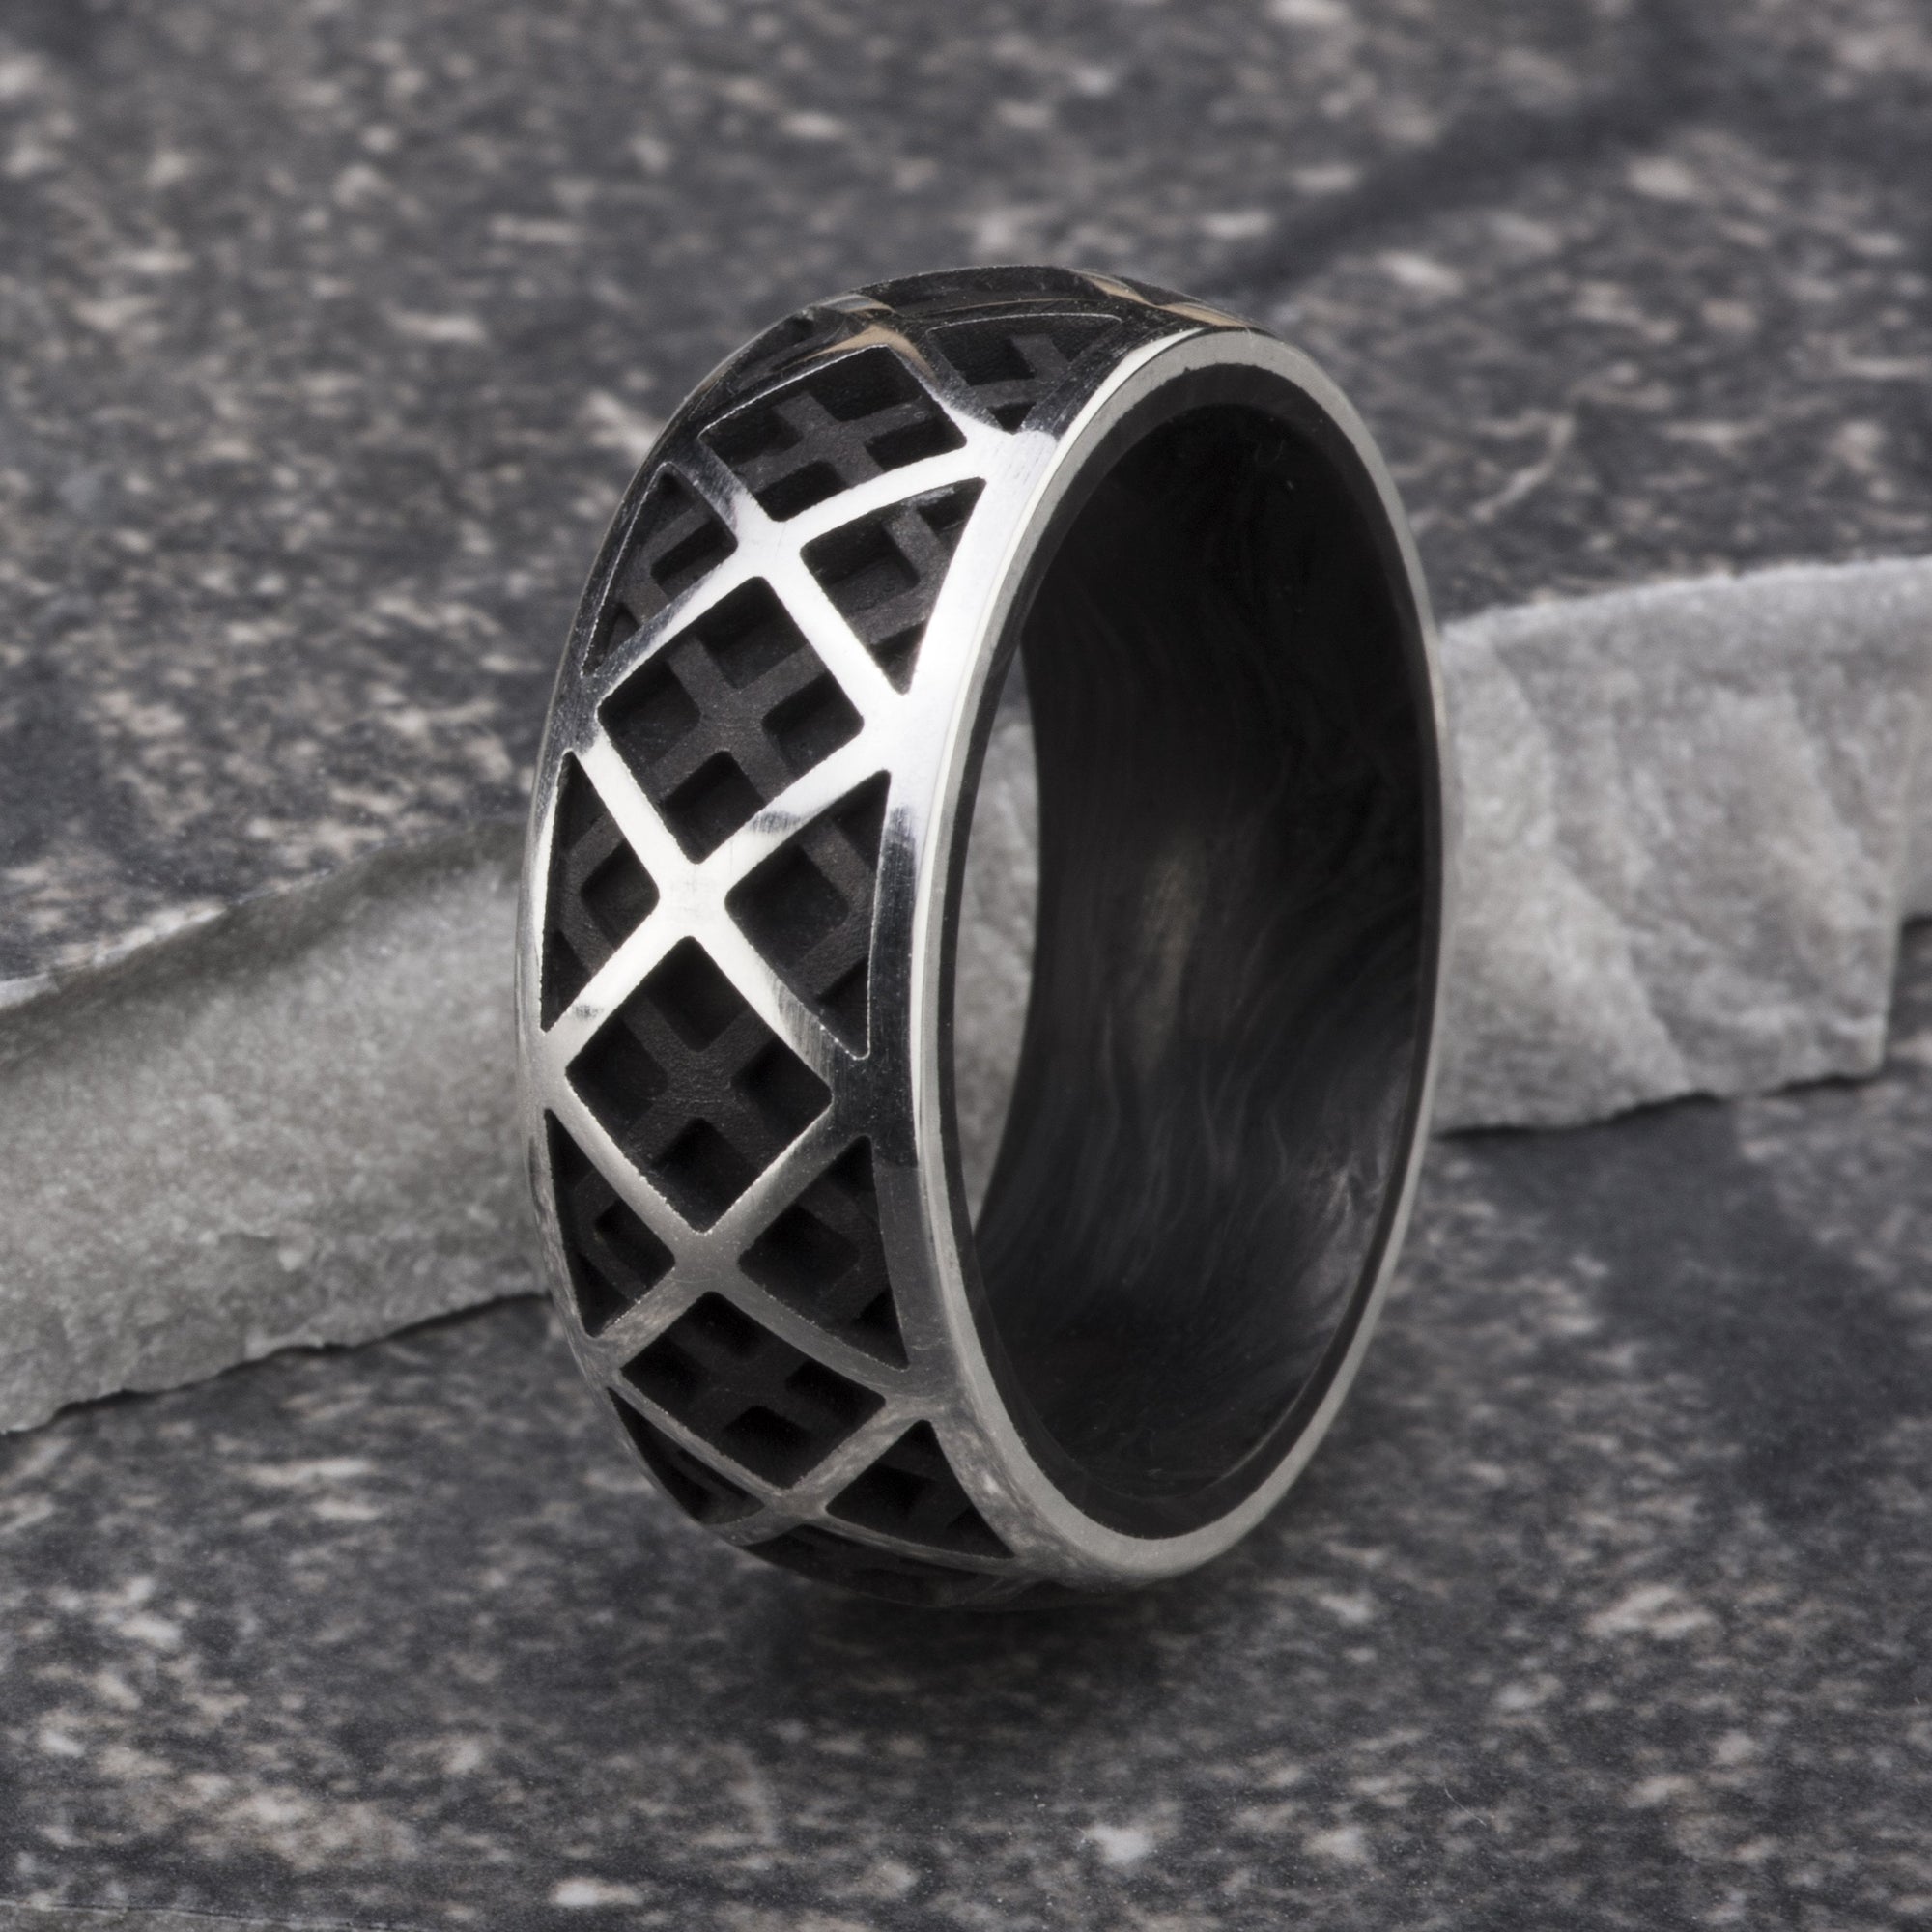 Sterling silver ring featuring a triangular pattern exterior and forged carbon fiber interior. 